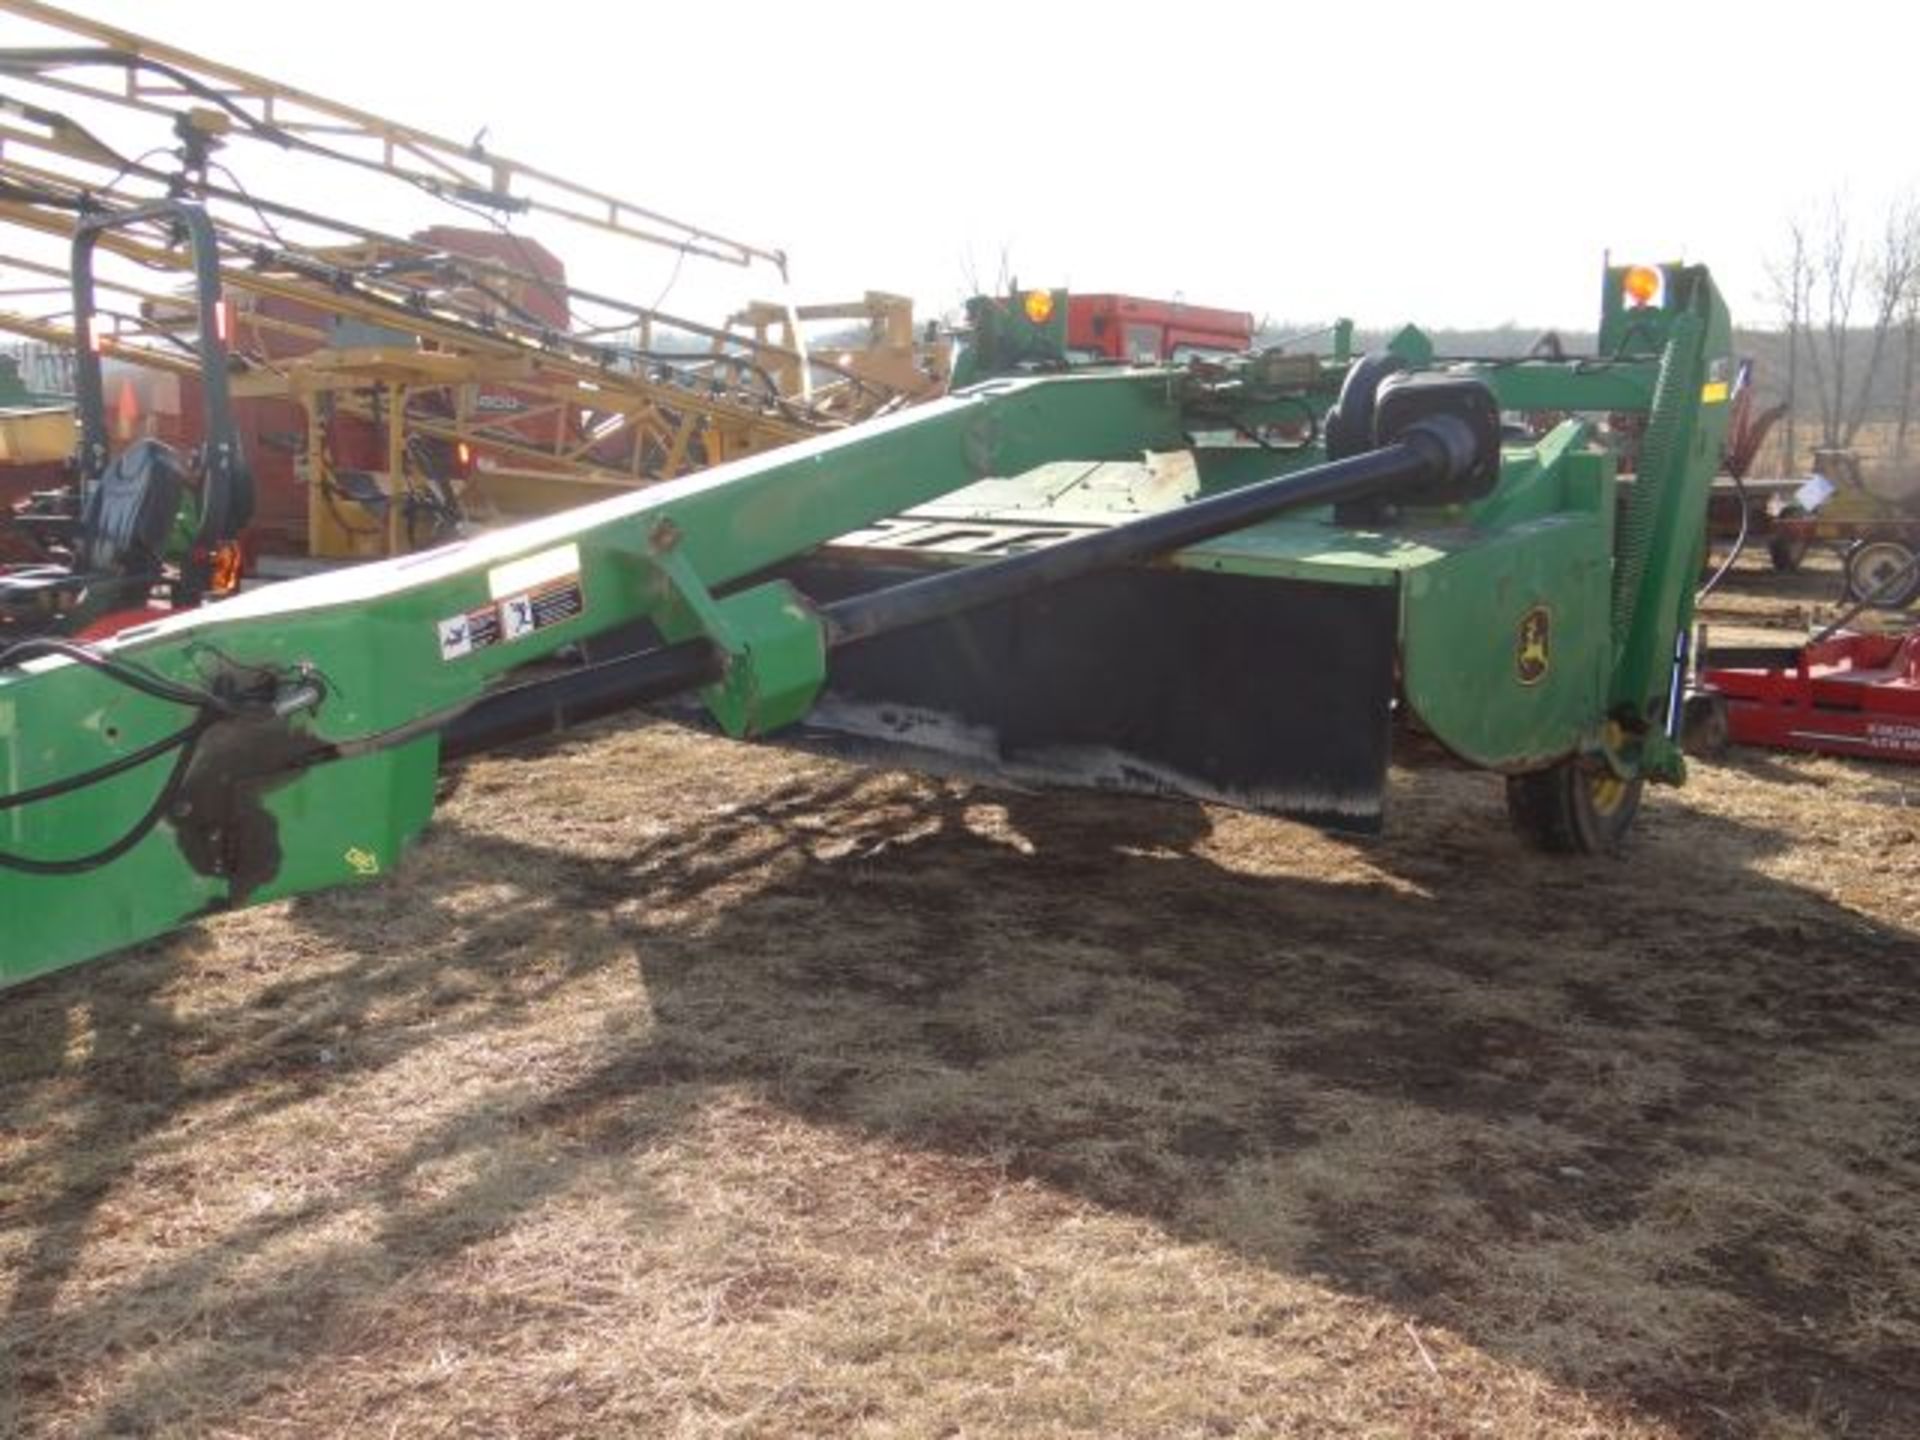 JD 530 MoCo, 2007 #65317, MOCO Side pull:9'9 cut, impeller conditioner, clevis hitch, single CV - Image 4 of 4